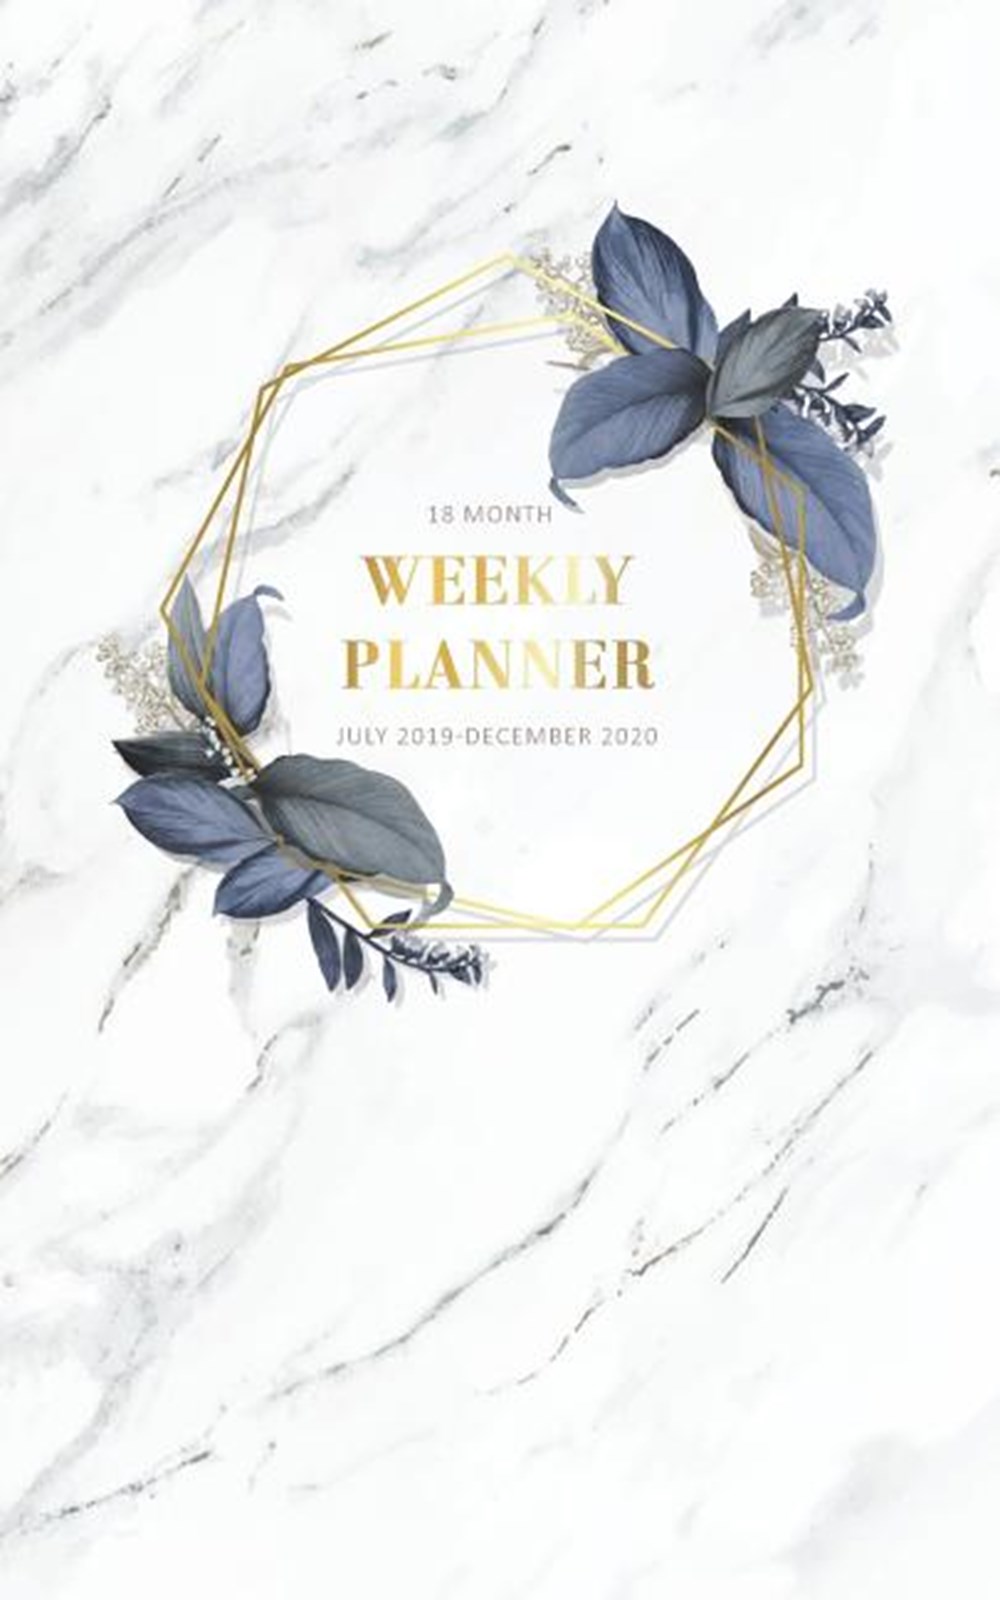 18 Month Weekly Planner 2019-2020 July 2019-December 2020 Planner Daily Planner Time Management Appo